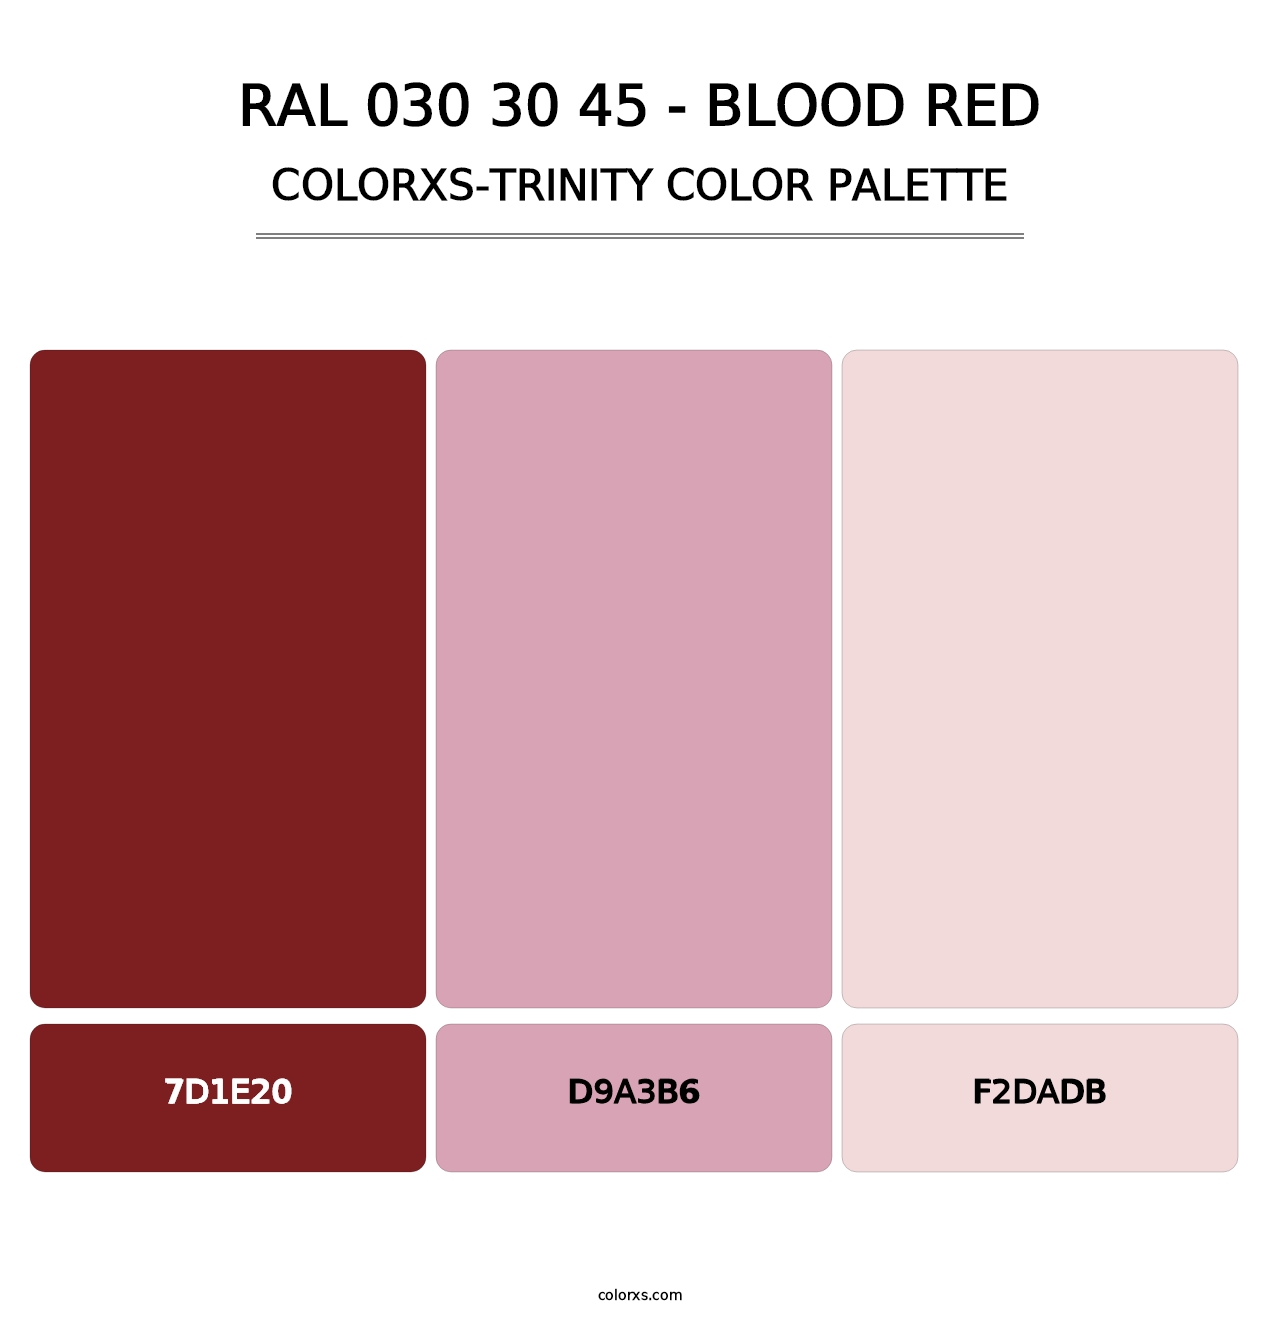 RAL 030 30 45 - Blood Red - Colorxs Trinity Palette